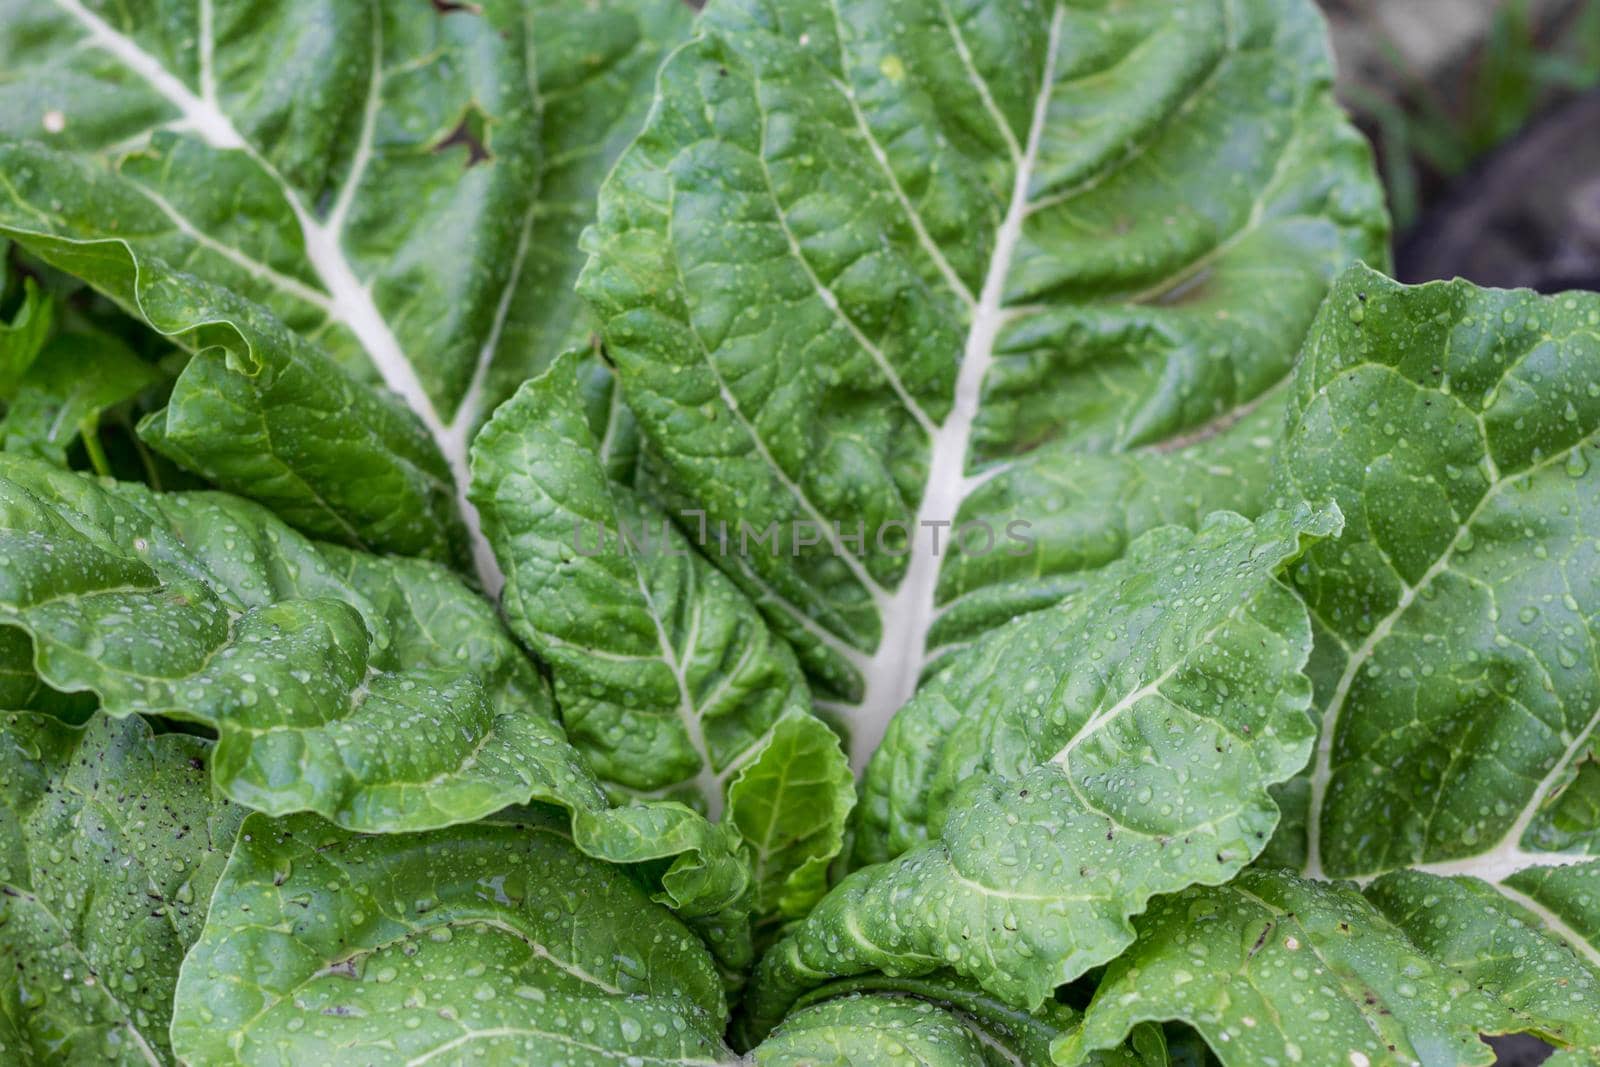 chard leaves wet with raindrops in the organic garden in the spring